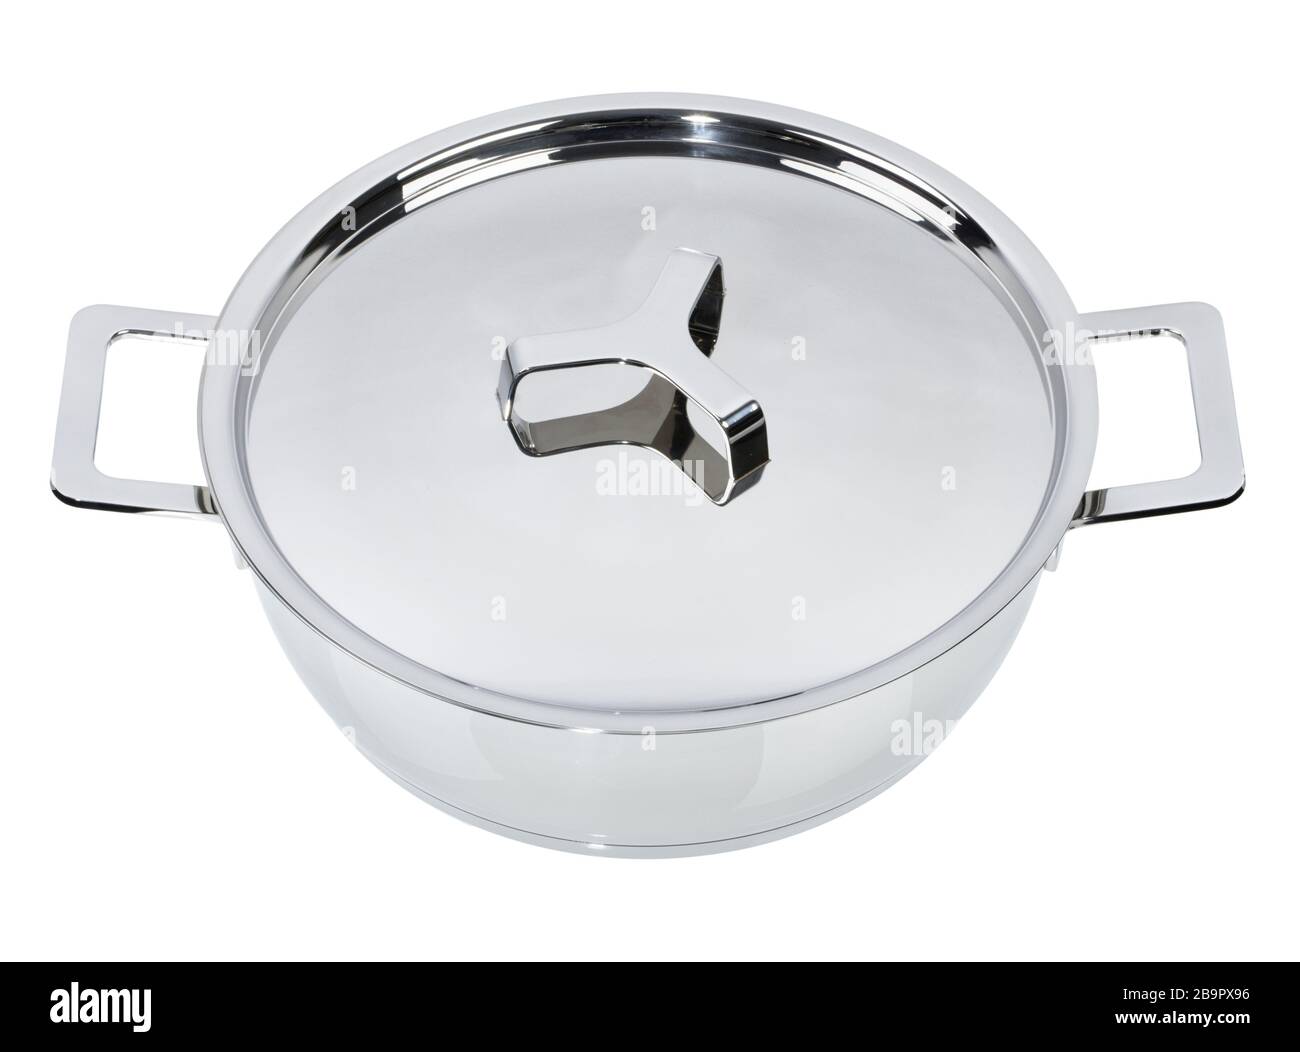 A stainless steel cooking pan with lid. Stock Photo